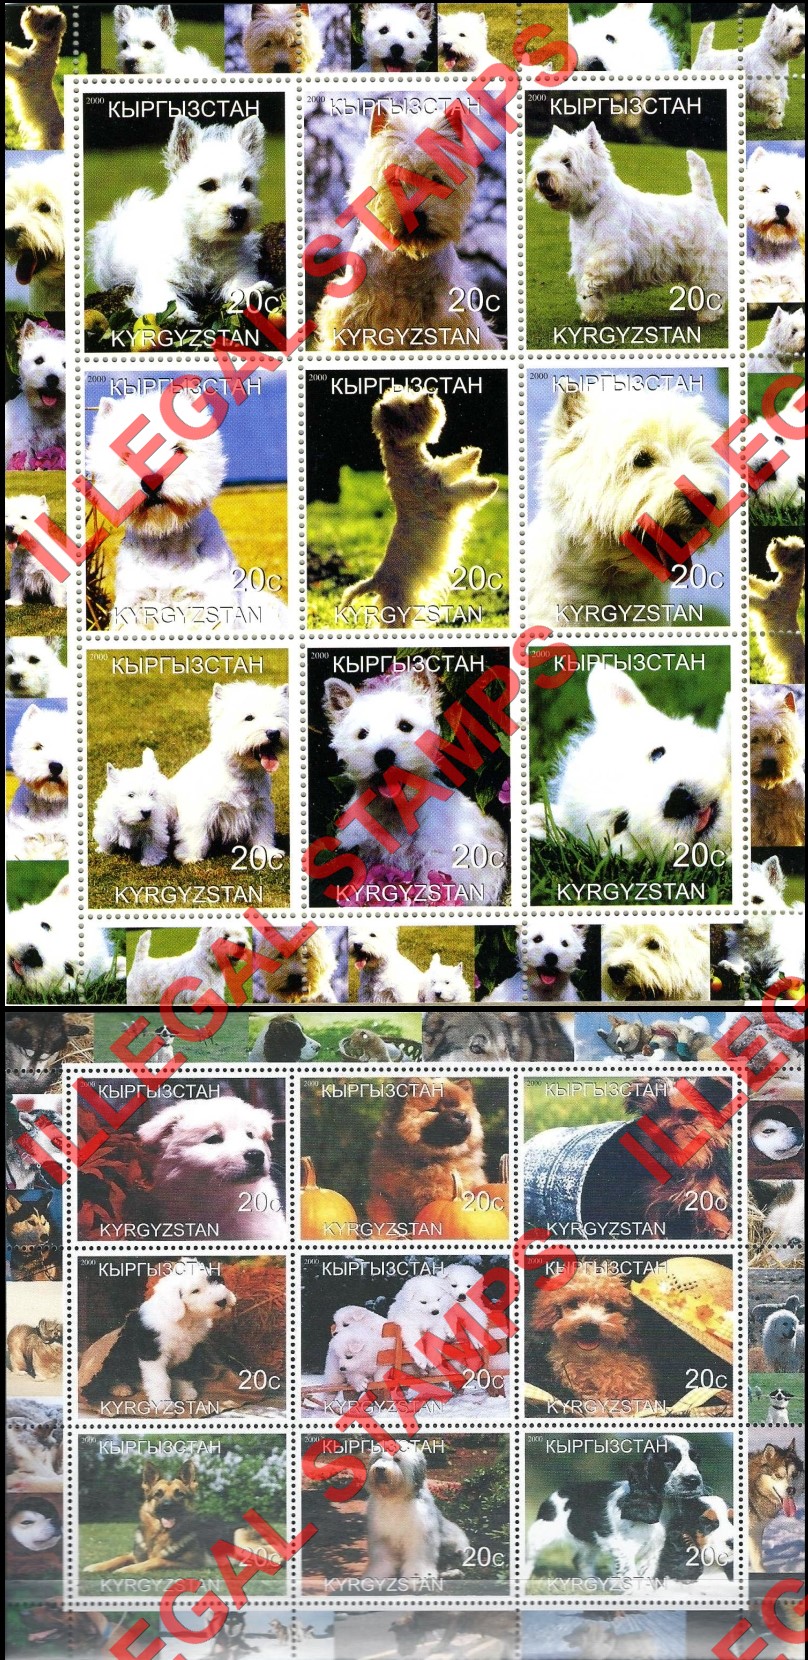 Kyrgyzstan 2000 Dogs Illegal Stamp Sheetlets of Nine